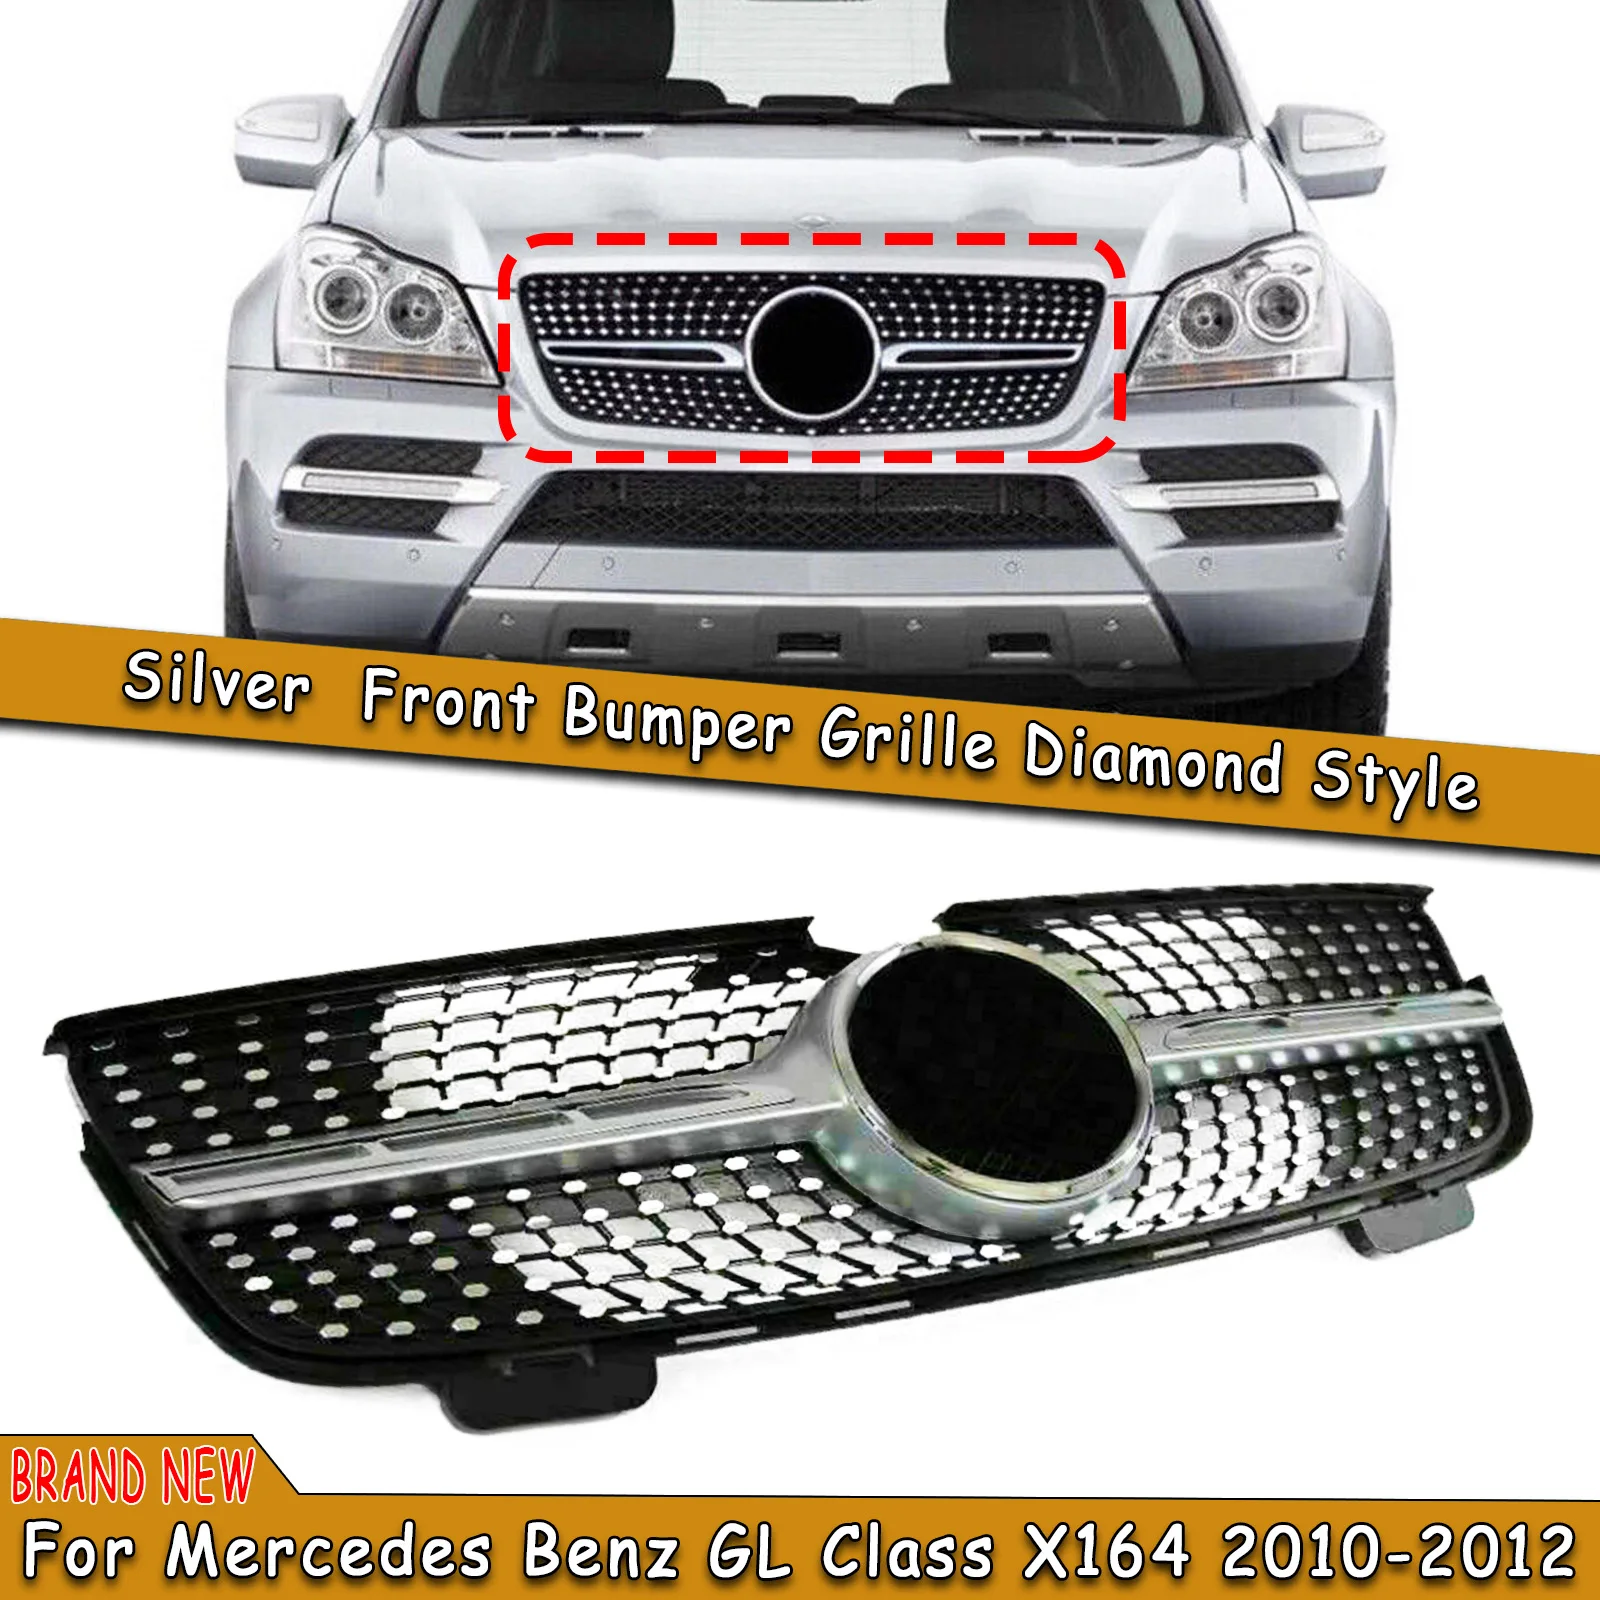 

Front Grille Upper Bumper Hood Mesh Grill For Mercedes Benz X164 GL320 Bluetec 4Matic CDI GL450 Base 2007-2012 Diamond Style